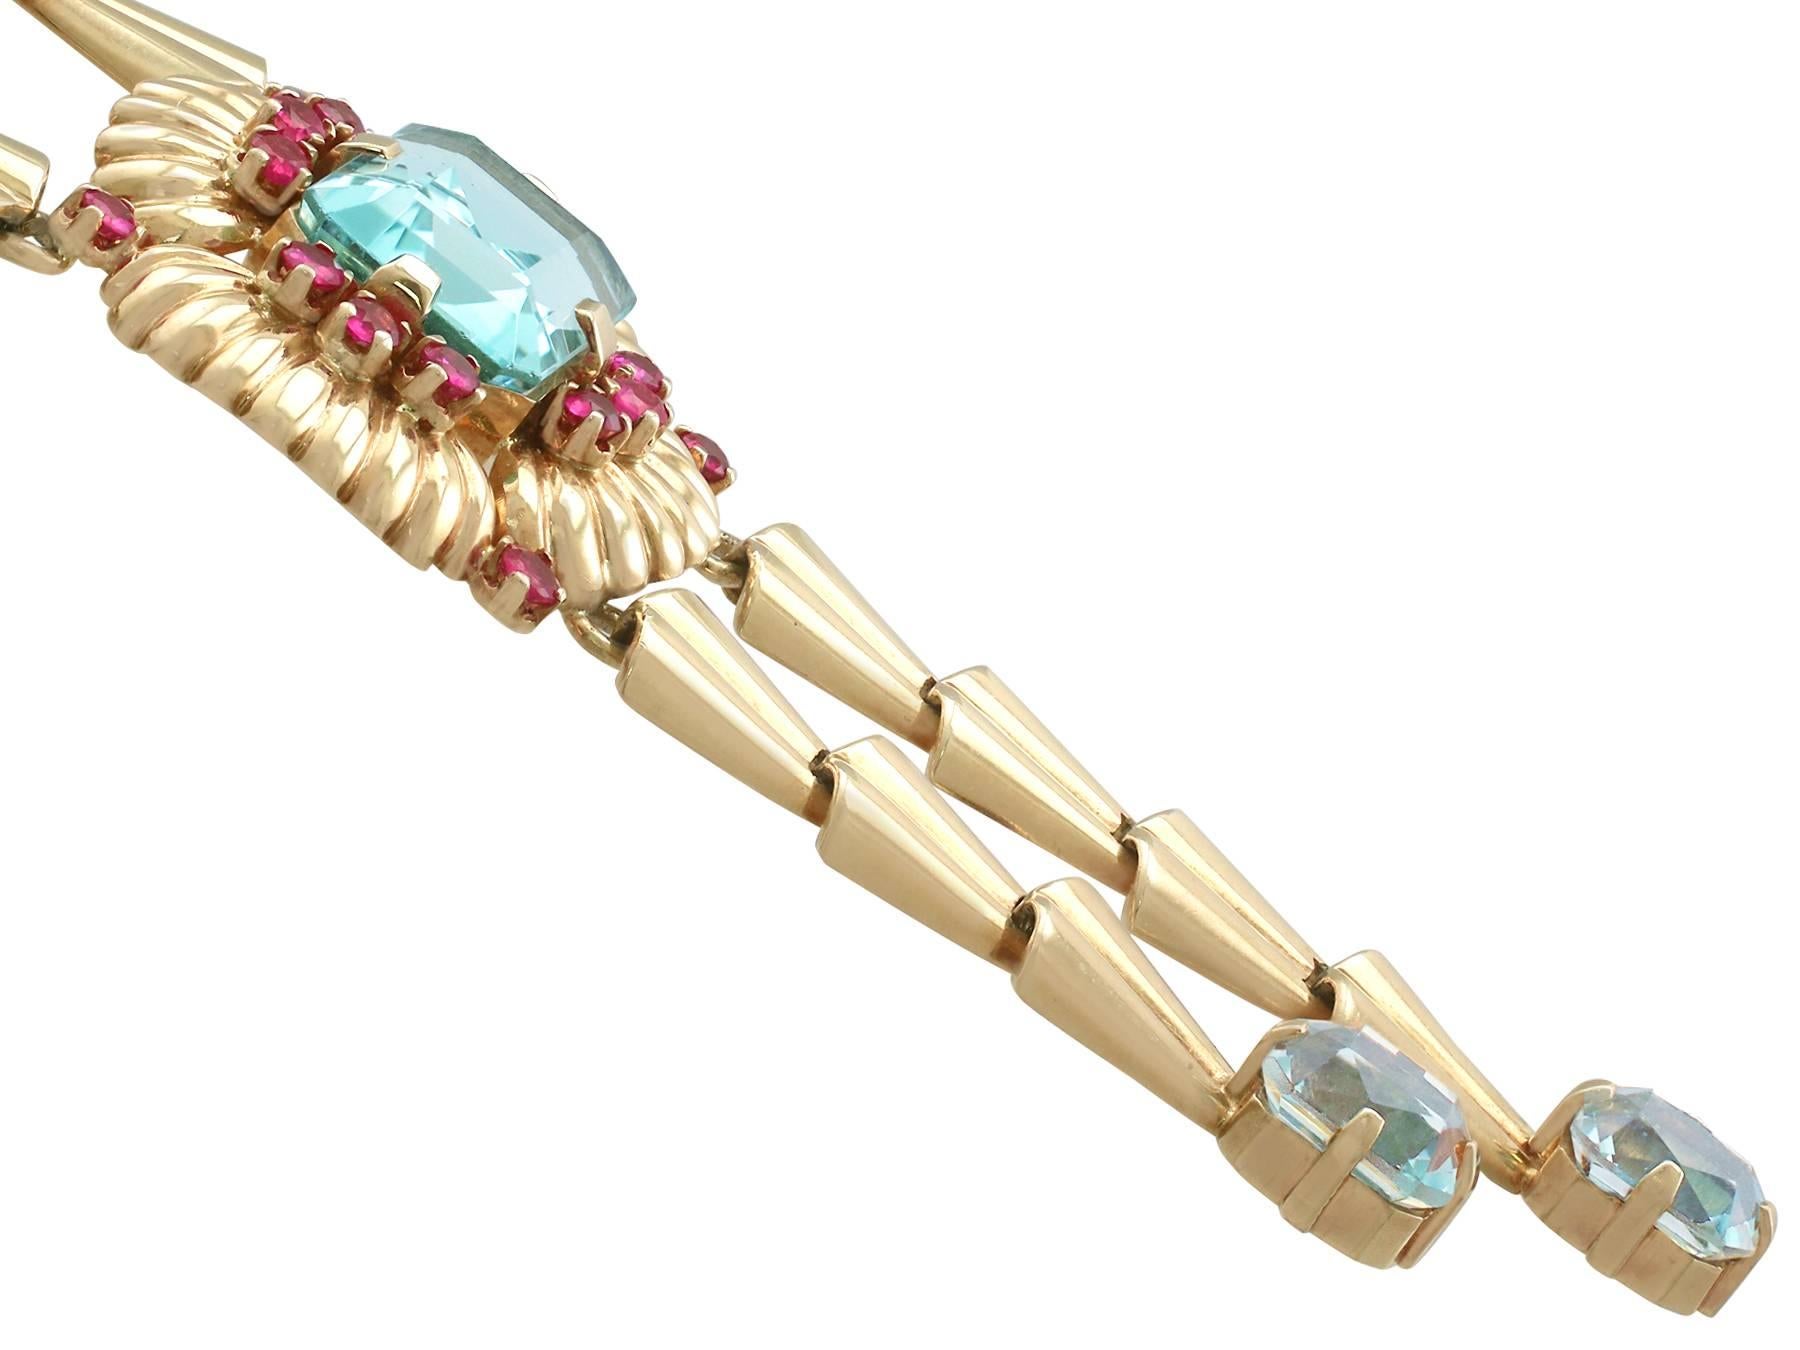 Emerald Cut 15.84 Carat Aquamarine and 1.28 Carat Ruby, Gold Necklace by Tiffany & Co.